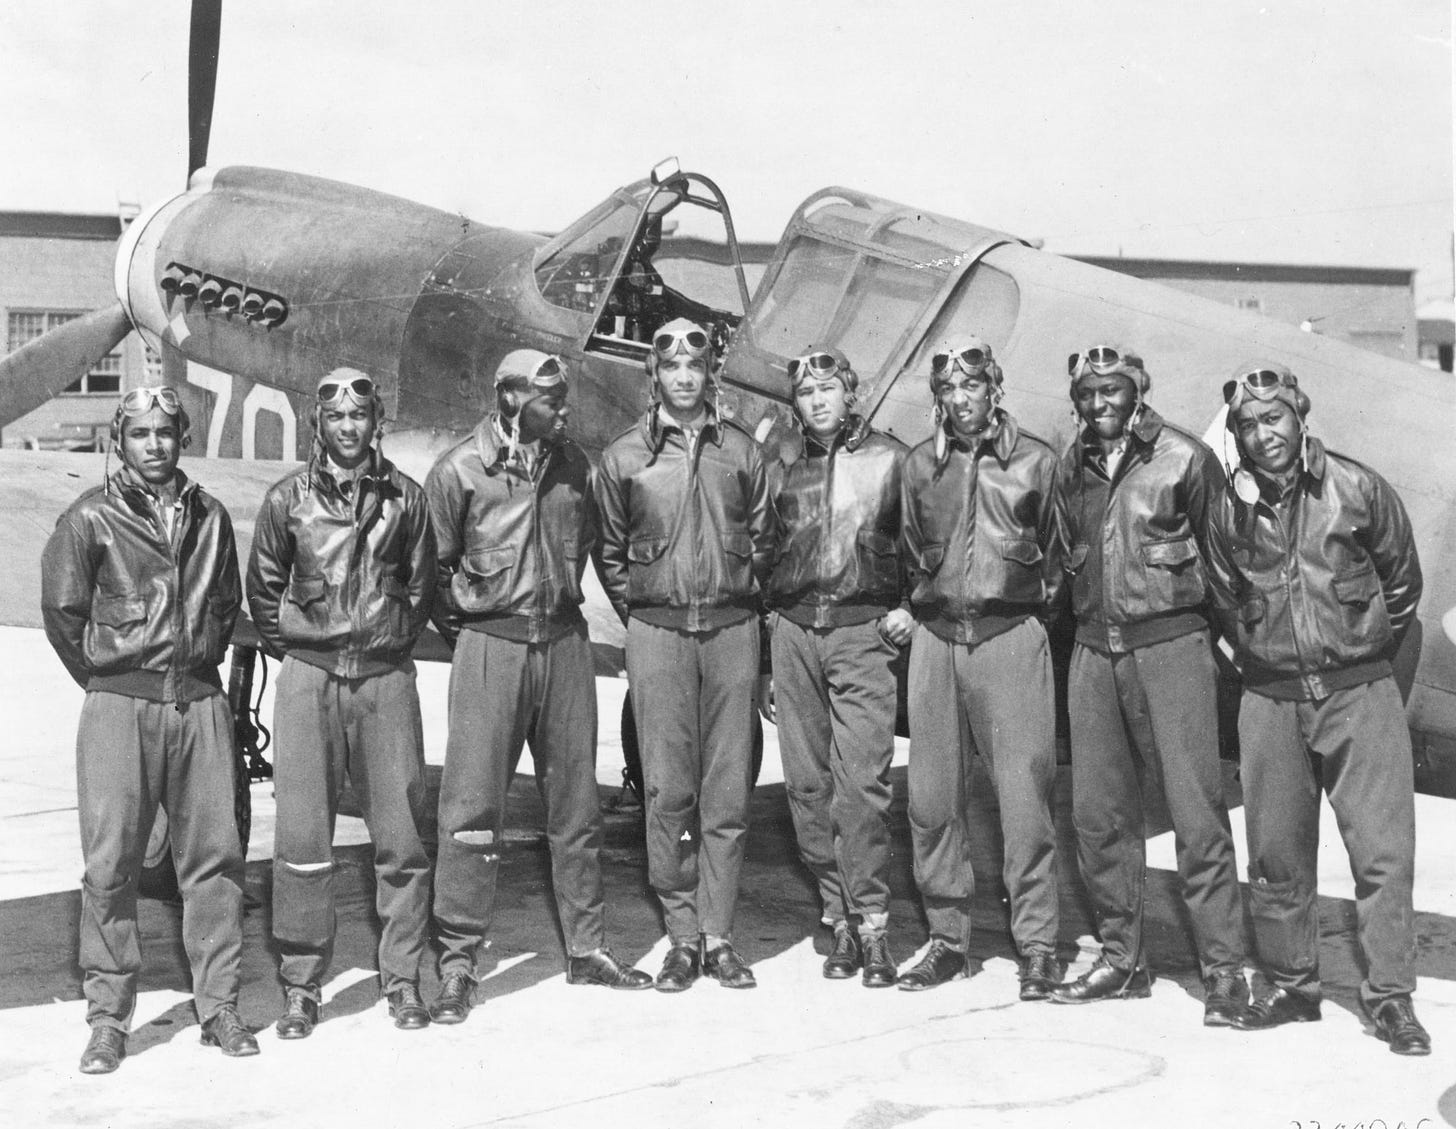 Eight Tuskegee pilots are pictured, in flight suits, in front of a plane.